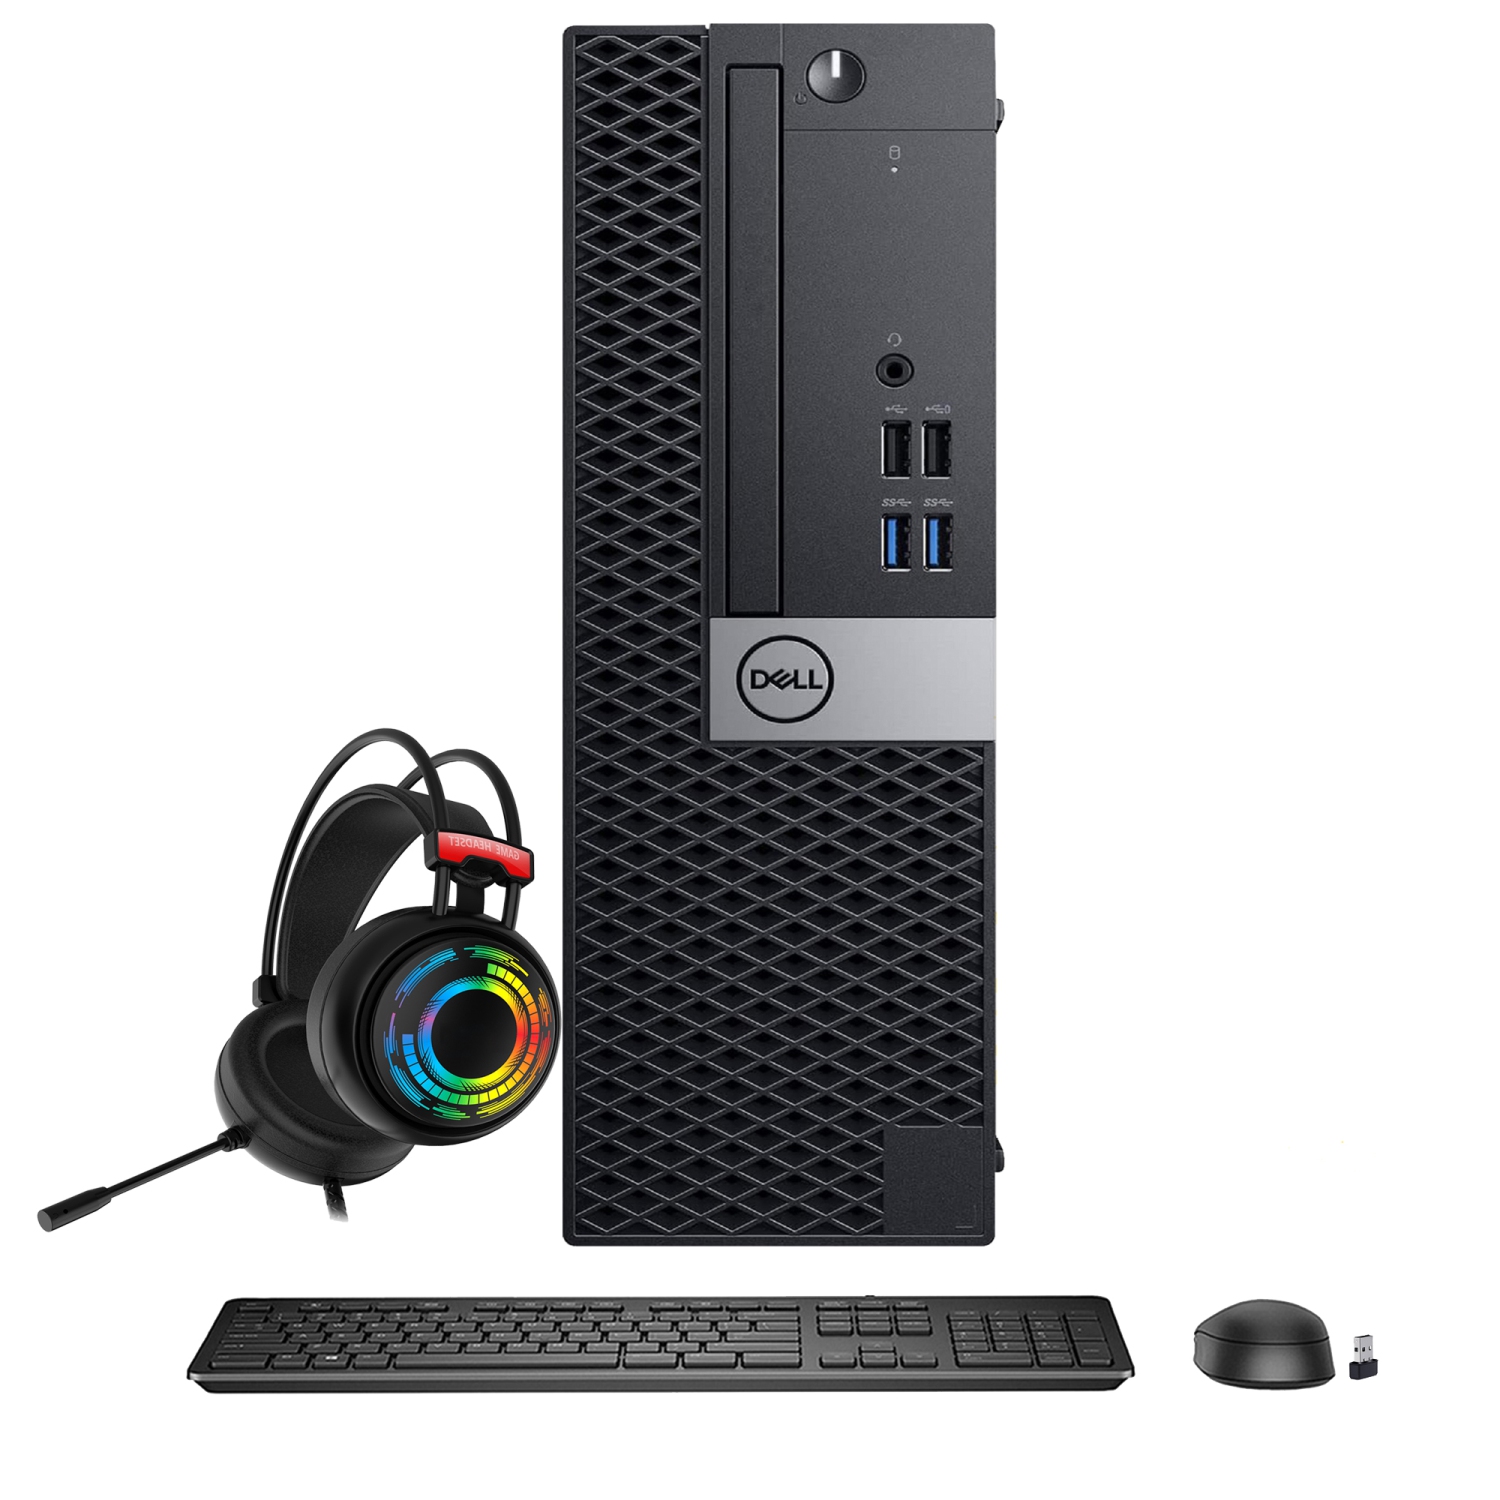 Refurbished (Excellent) - Dell Computer Desktop PC 5040 SFF (Intel Core i5 Processor/ 1TB SSD/ 16GB DDR4 RAM/ Windows 10 Pro/ Gaming Headset) Wireless Keyboard and Mouse - Black